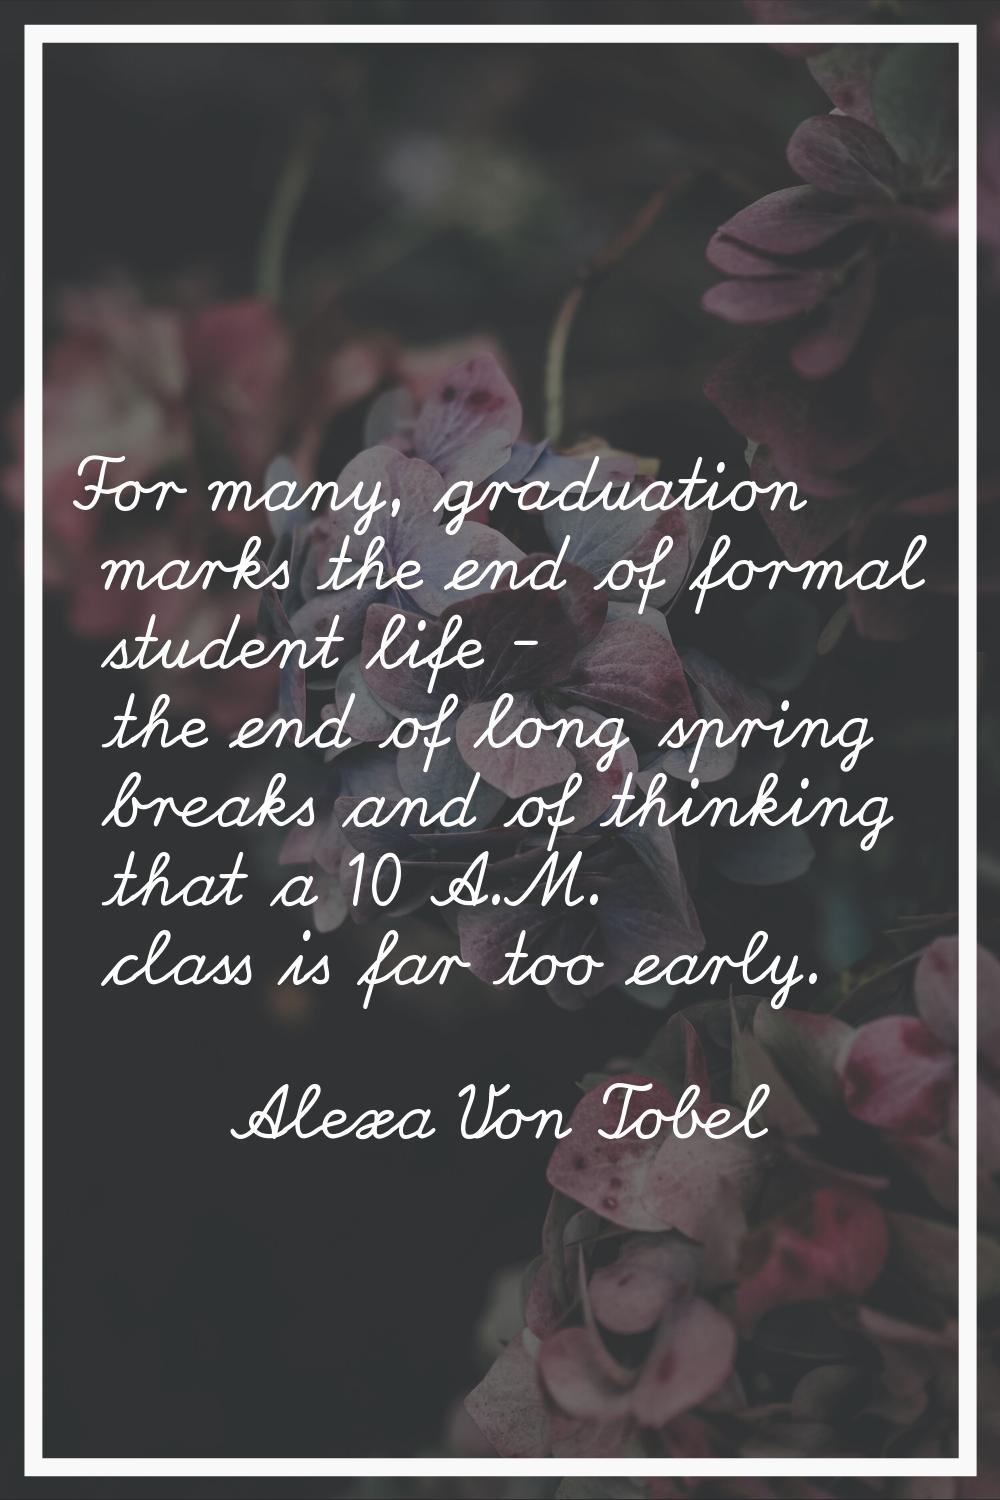 For many, graduation marks the end of formal student life - the end of long spring breaks and of th